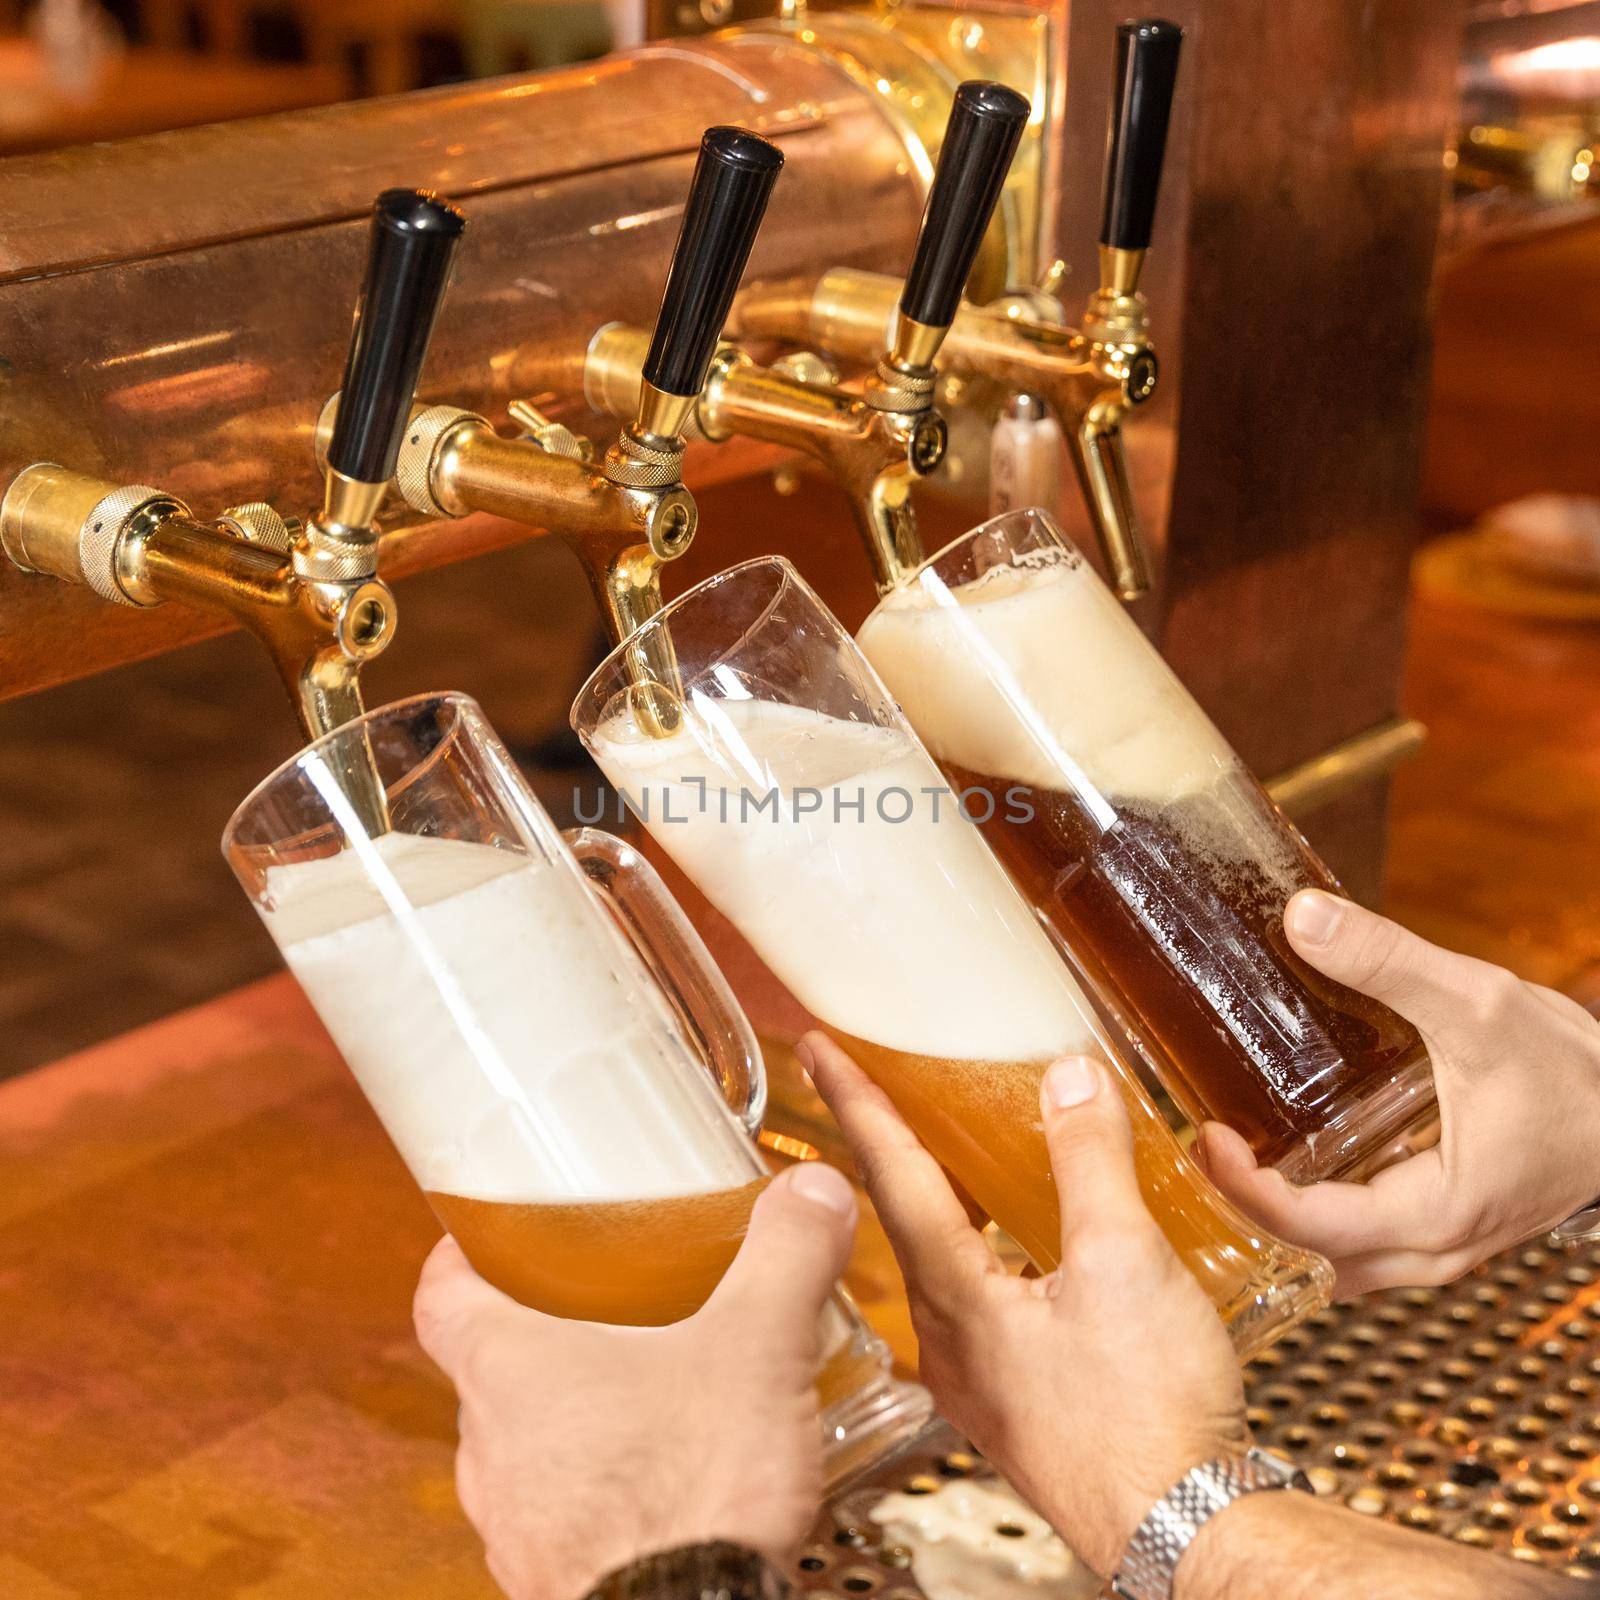 Pouring, filling beer glasses, mugs from barrel by ferhad